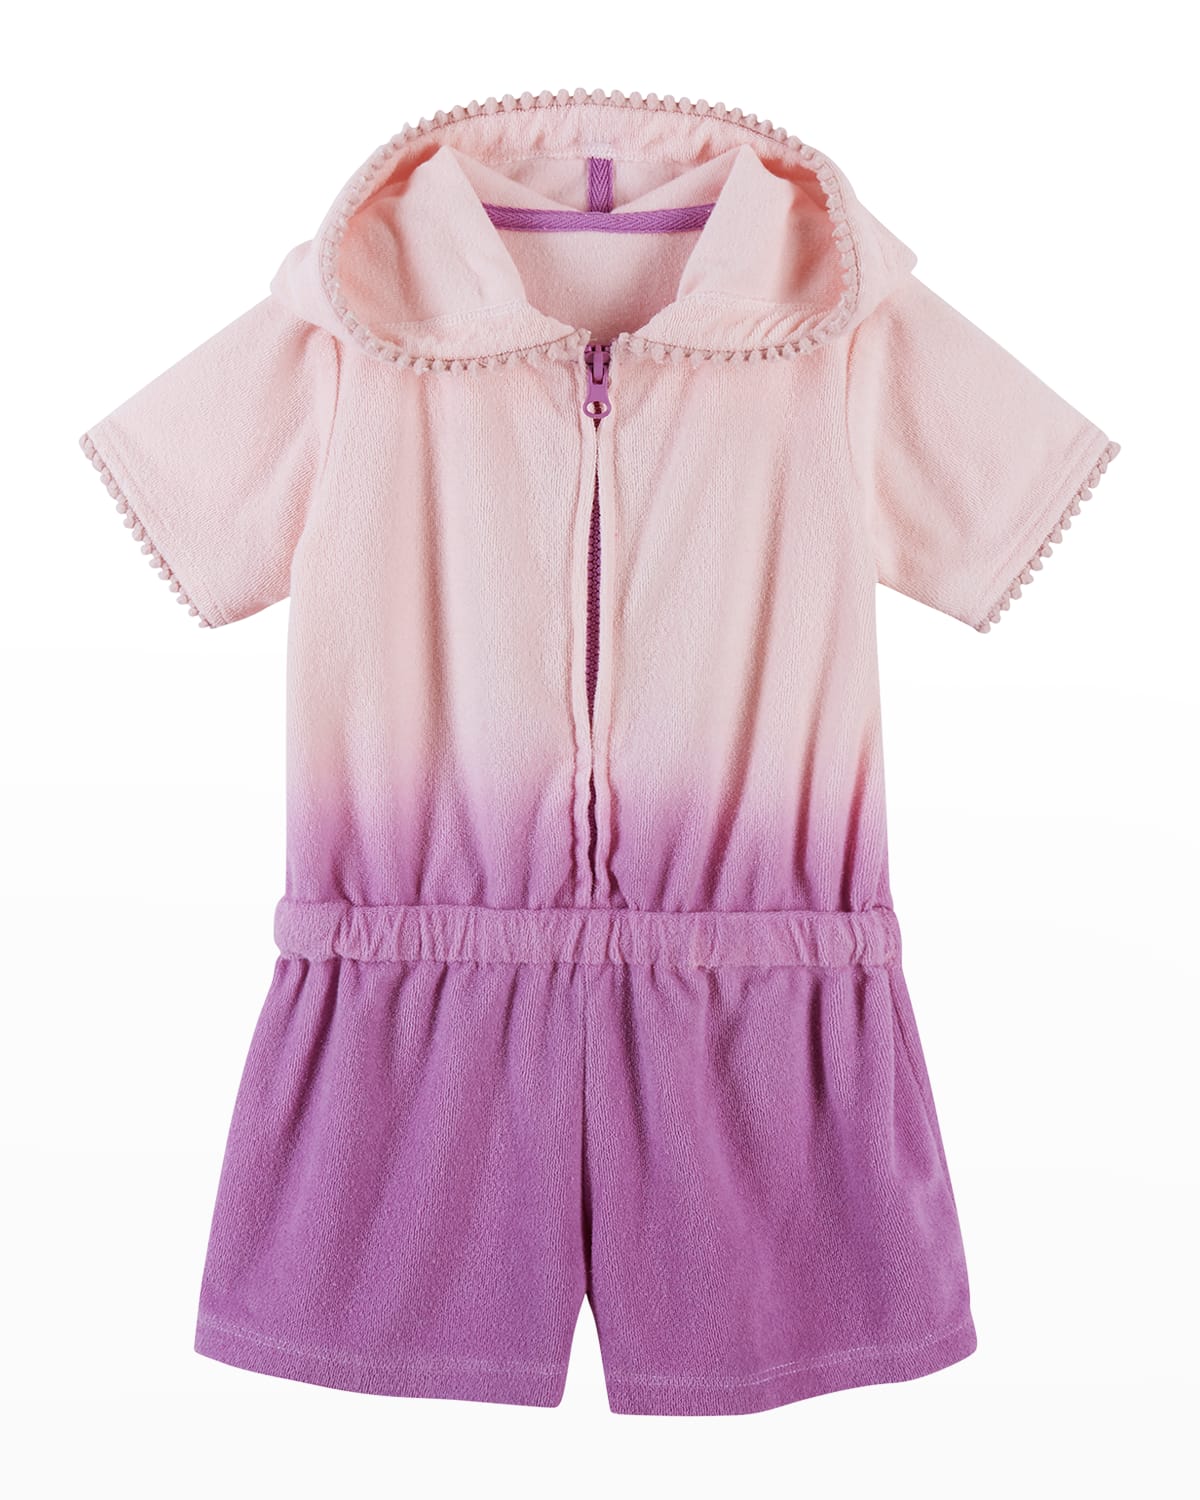 Andy & Evan Kids' Girl's French Terry Cover Up In Purple Ombre